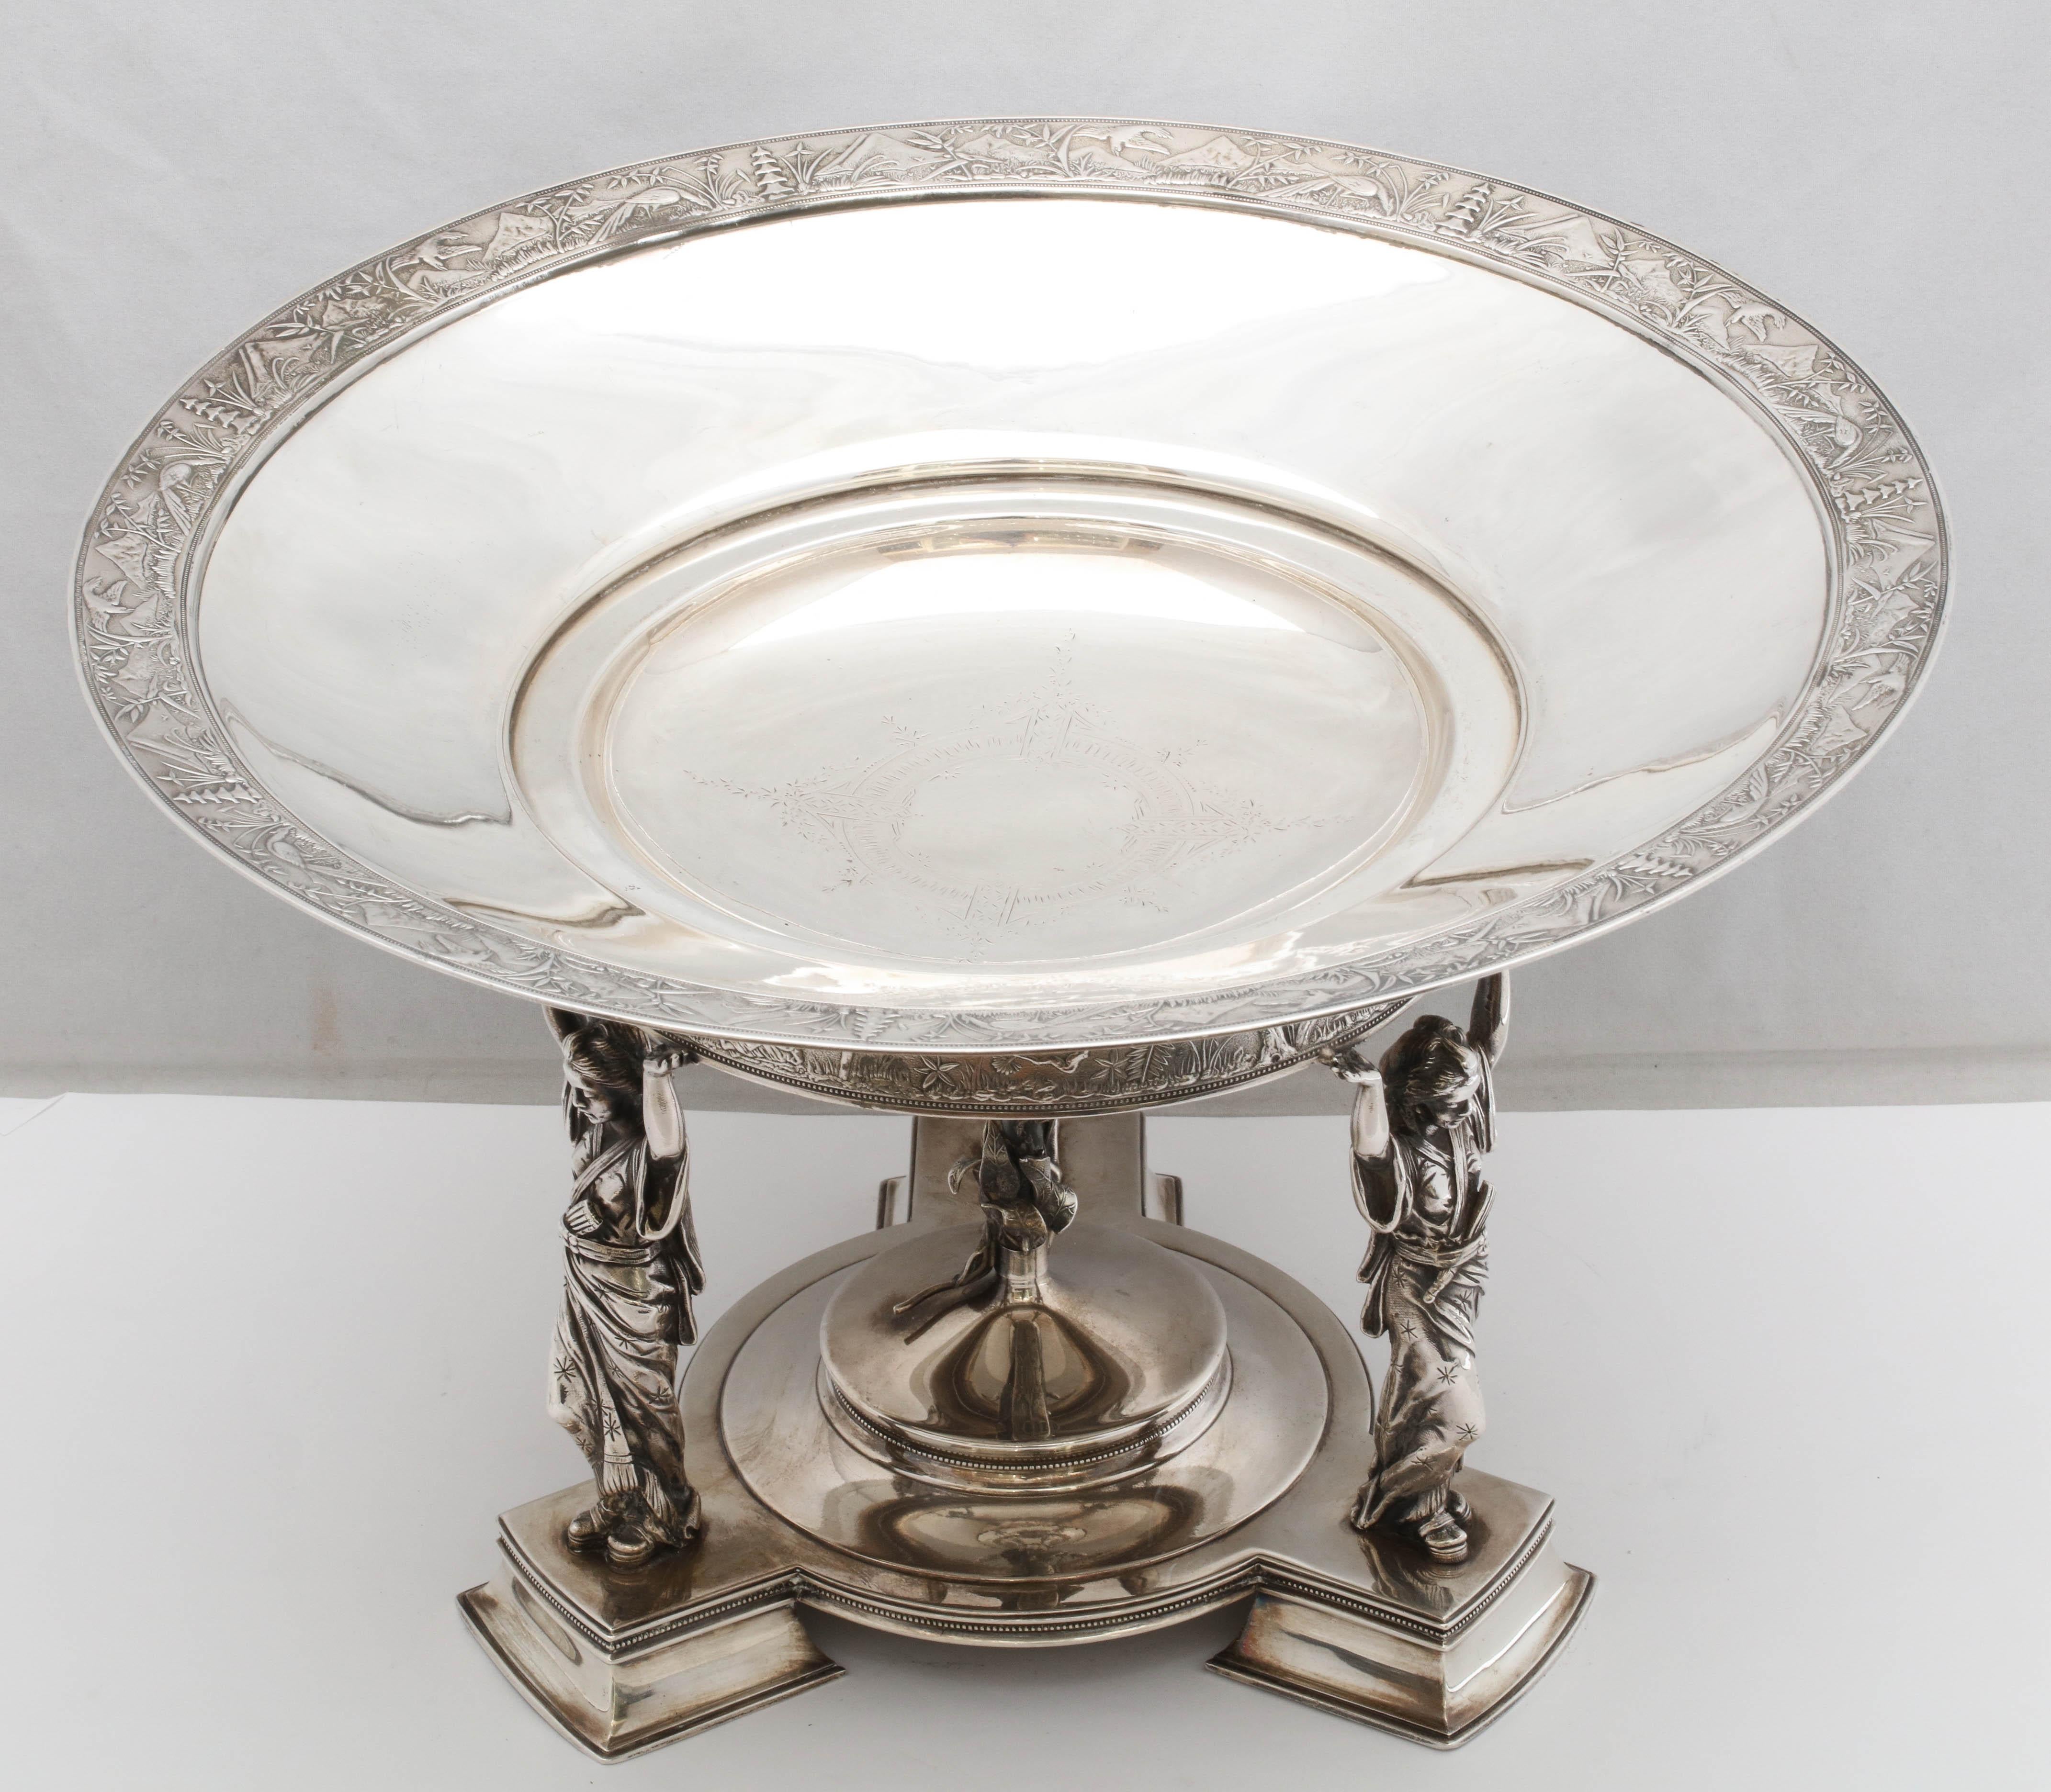 Beautiful, sterling silver, Japonesque, footed centerpiece bowl, Gorham Manufacturing Co., Providence, Rhode Island, year hallmarked for 1872. The central bowl is supported by three Geishas in traditional dress. Bowl is decorated with Japanese